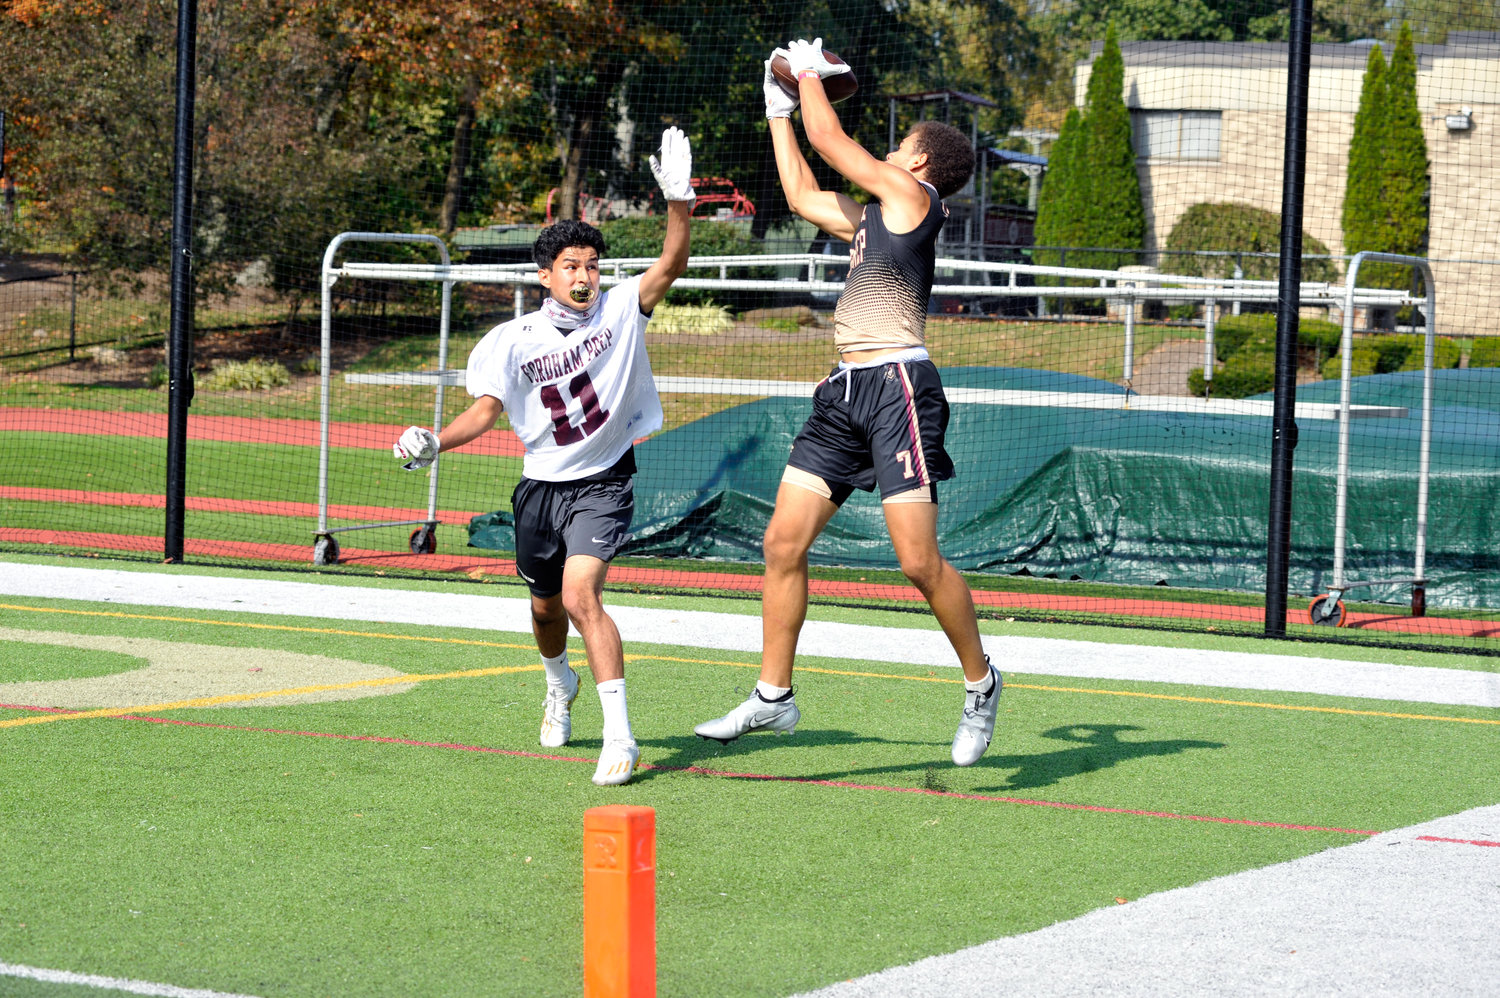 Iona Preparatory School senior Alex Williams catches a touchdown pass during Iona Prep’s 46-23 flag football victory in New Rochelle Oct. 10.